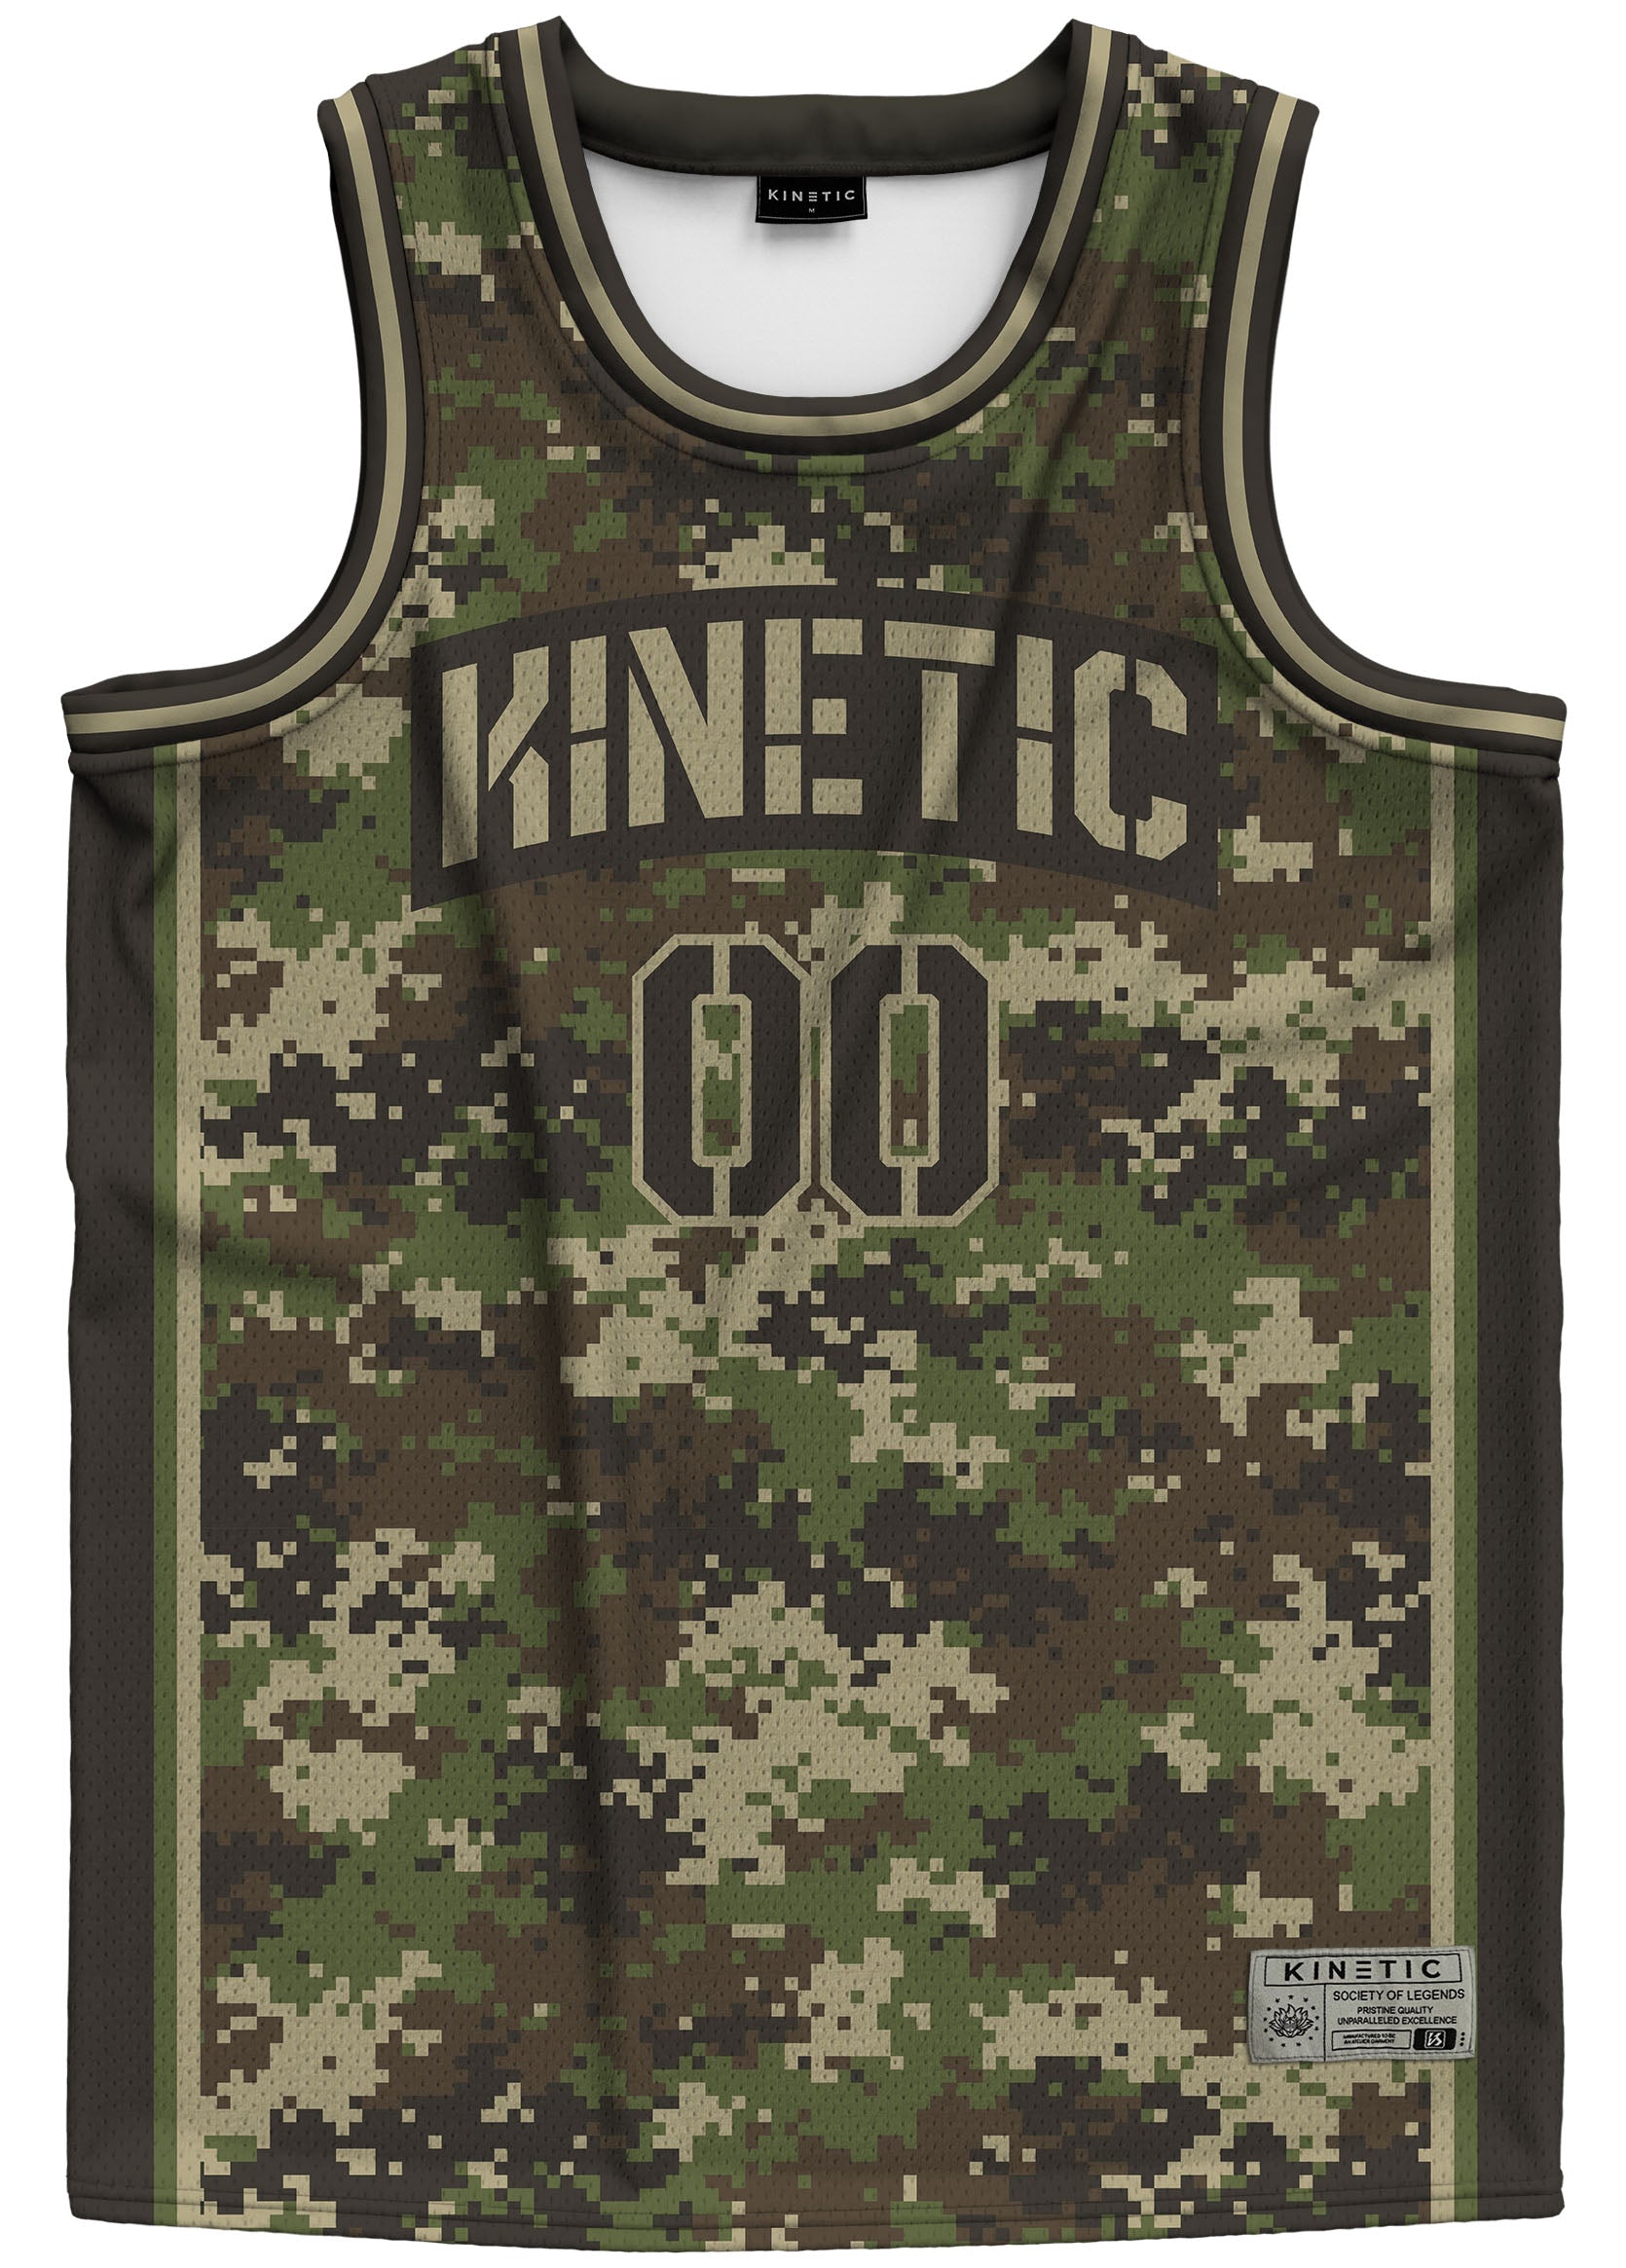  Camouflage Custom Basketball Jersey Uniforms Personalized  Printed Your Own Name & Number Men/Women/Kids Breathable Quick Dry (Army  Green